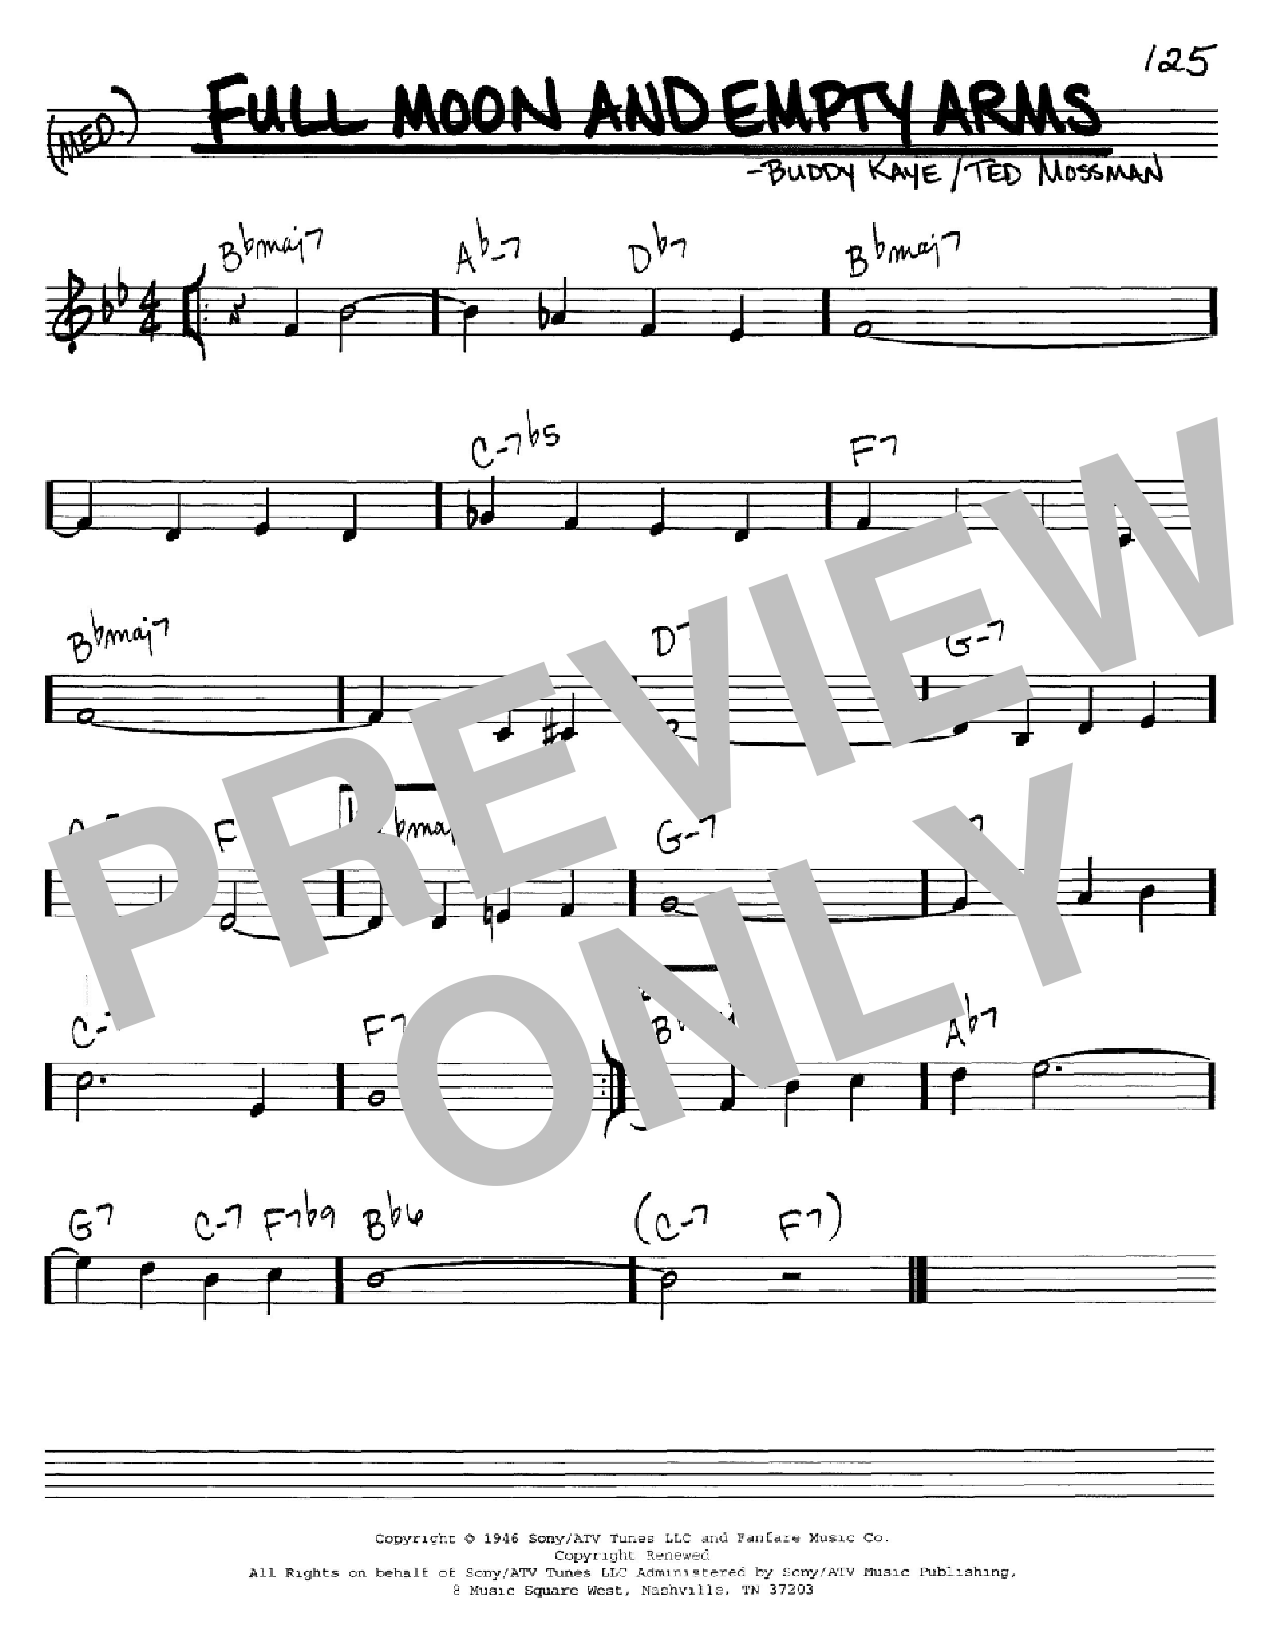 Download Buddy Kaye Full Moon And Empty Arms Sheet Music